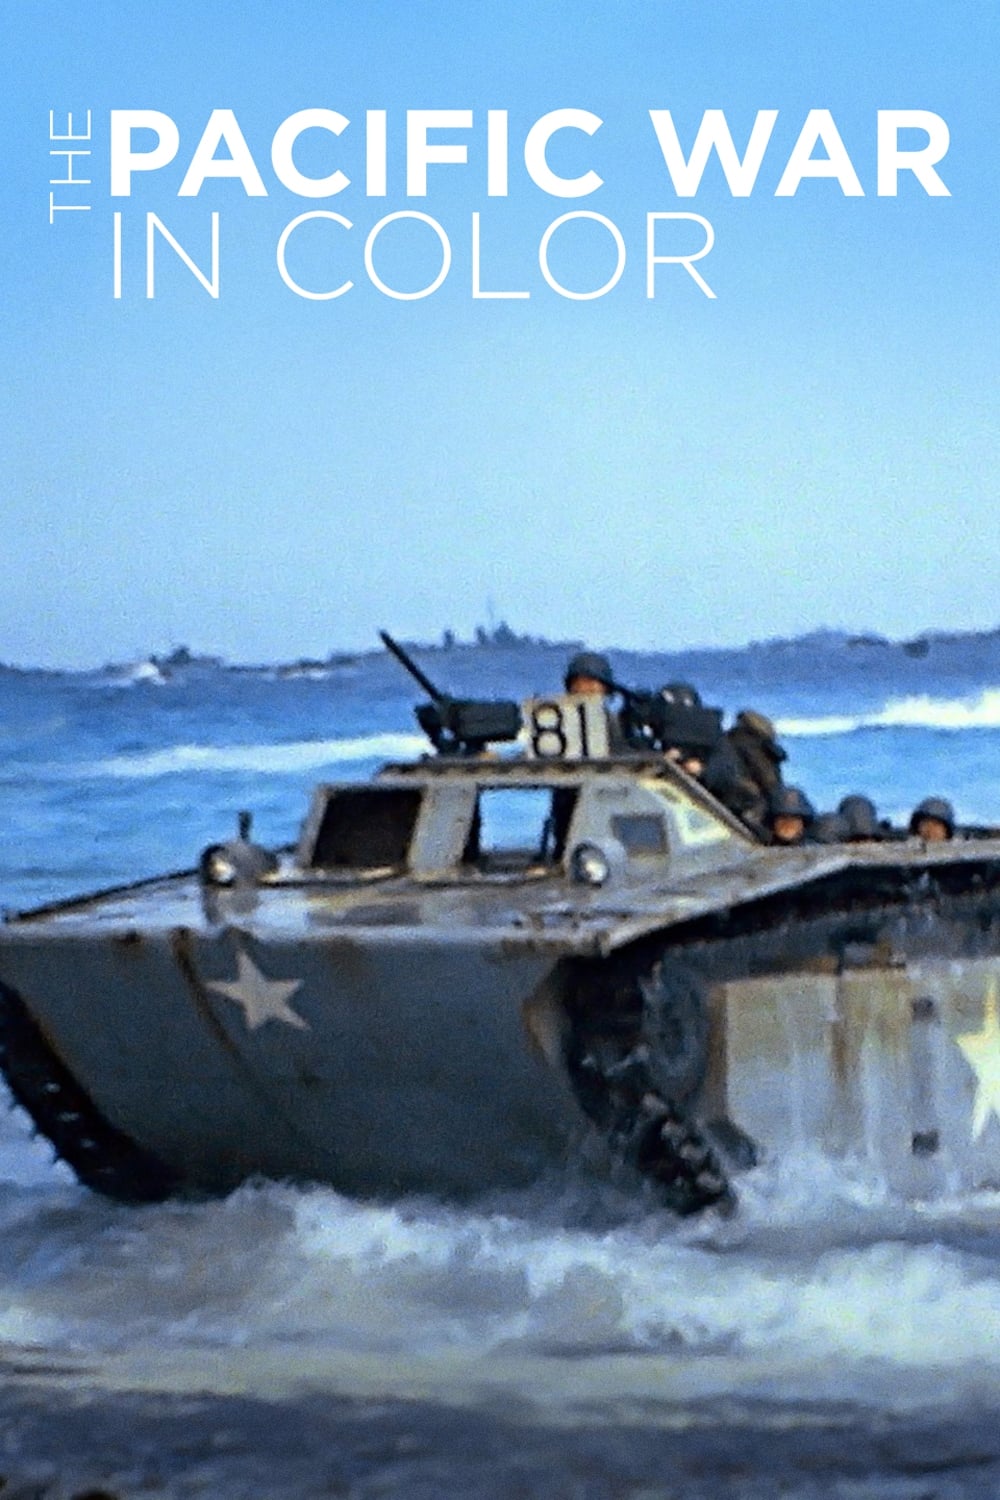 The Pacific War in Color Series9 Watch movies online